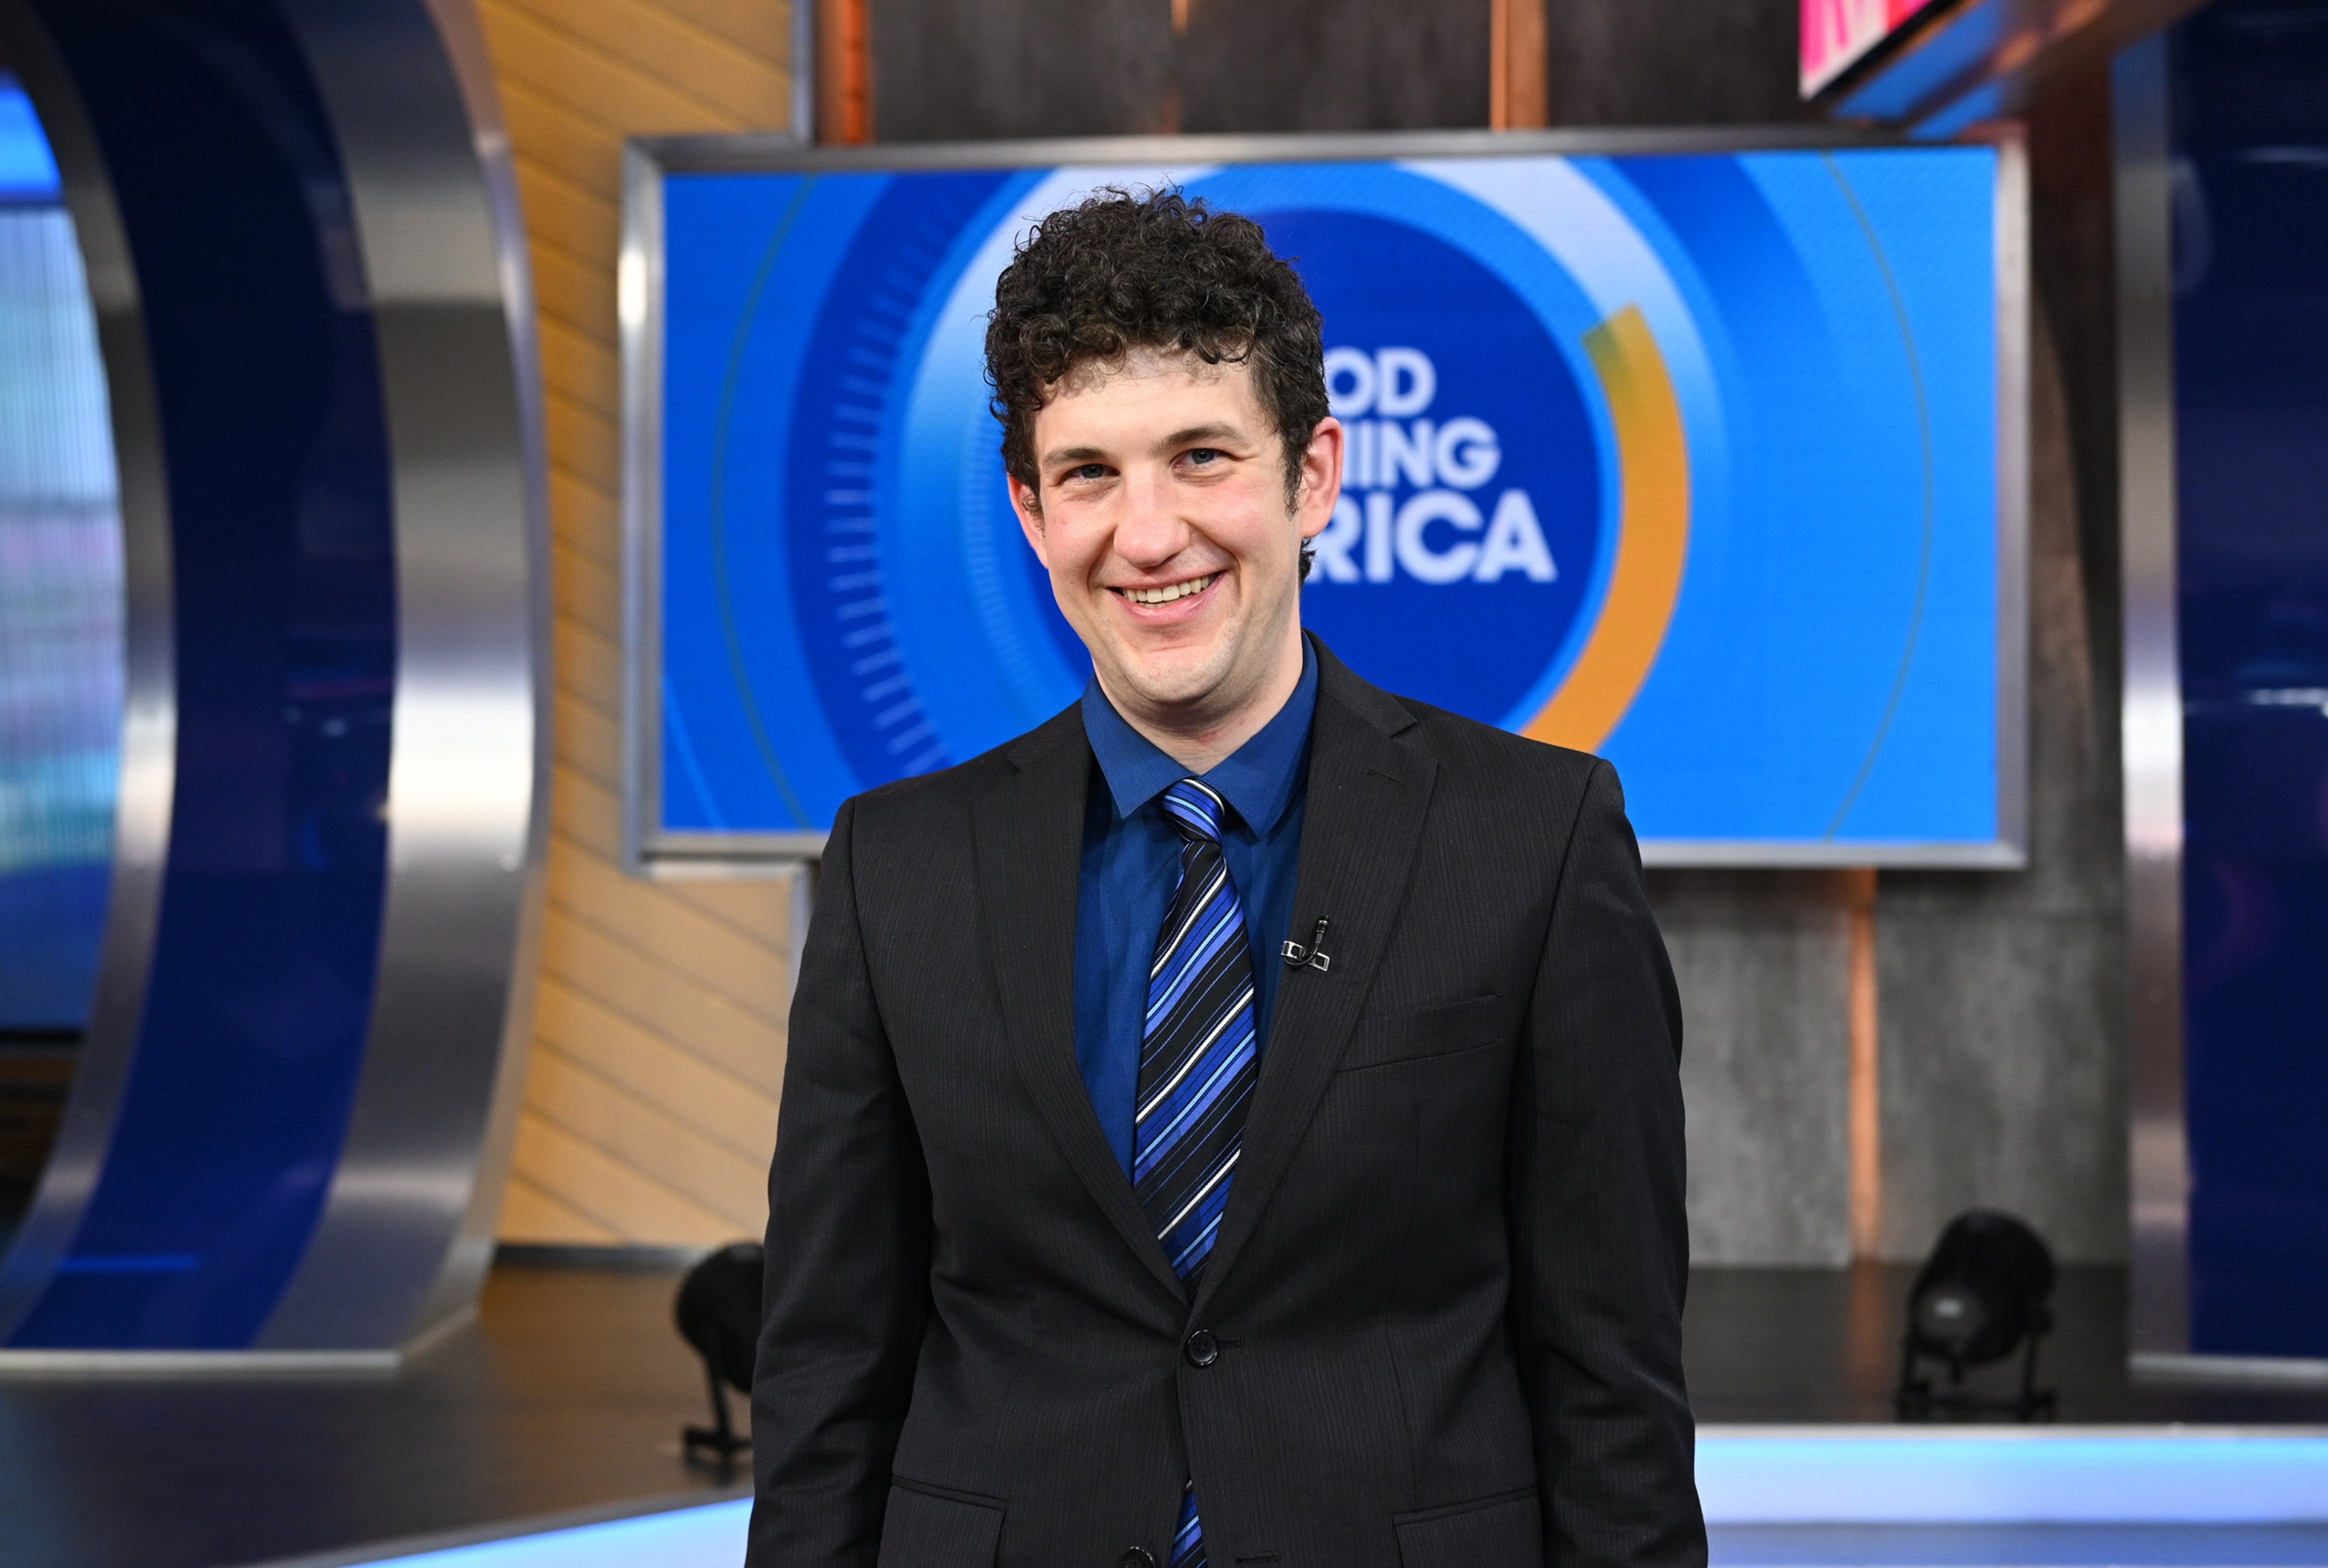 'Jeopardy!' champ Matt Amodio as a guest on 'Good Morning America'